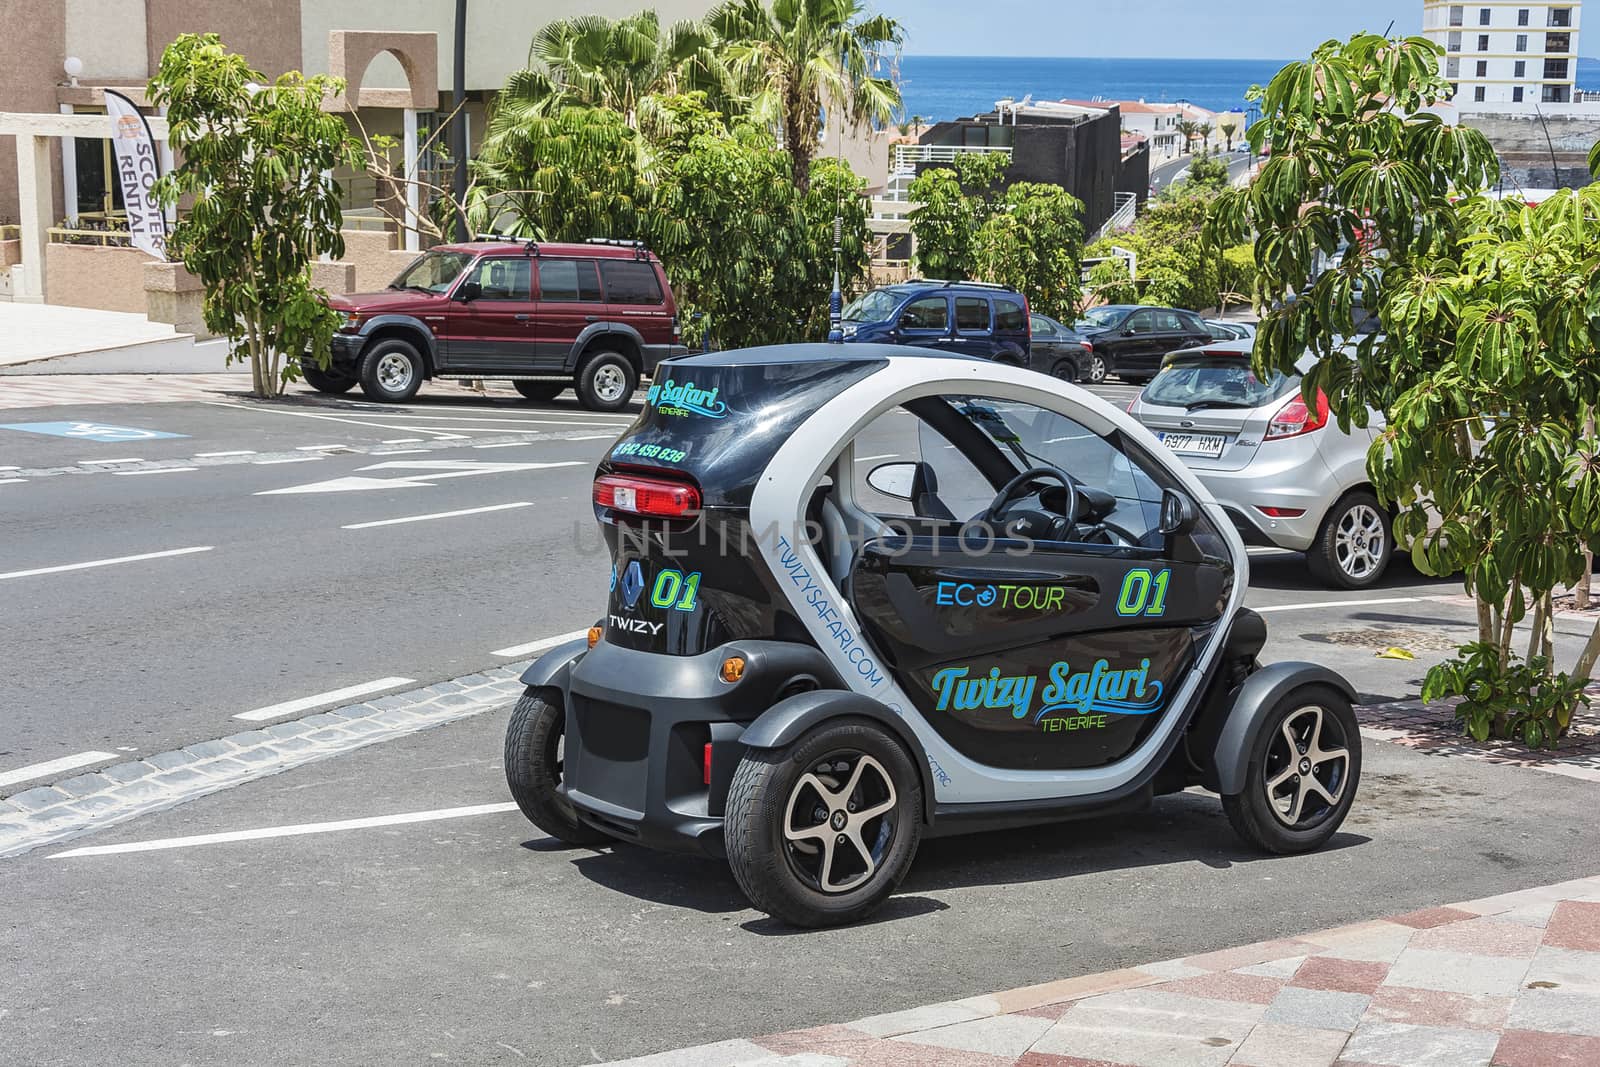 Renault Twizy car is parked in a city street (Tenerife, Spain) by Grommik